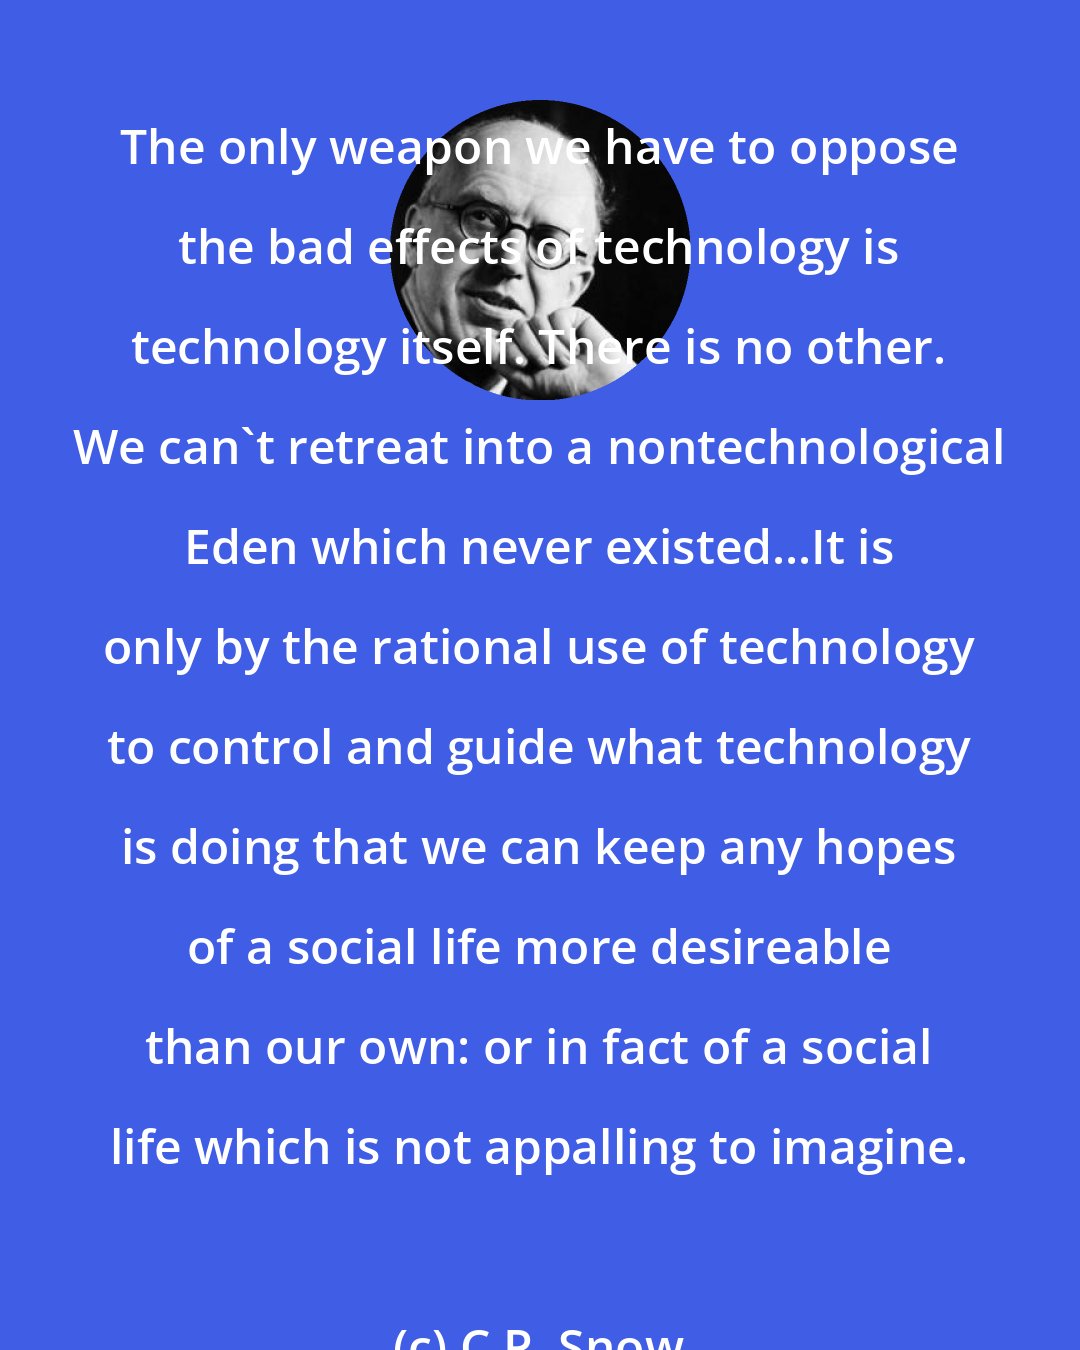 C.P. Snow: The only weapon we have to oppose the bad effects of technology is technology itself. There is no other. We can't retreat into a nontechnological Eden which never existed...It is only by the rational use of technology to control and guide what technology is doing that we can keep any hopes of a social life more desireable than our own: or in fact of a social life which is not appalling to imagine.